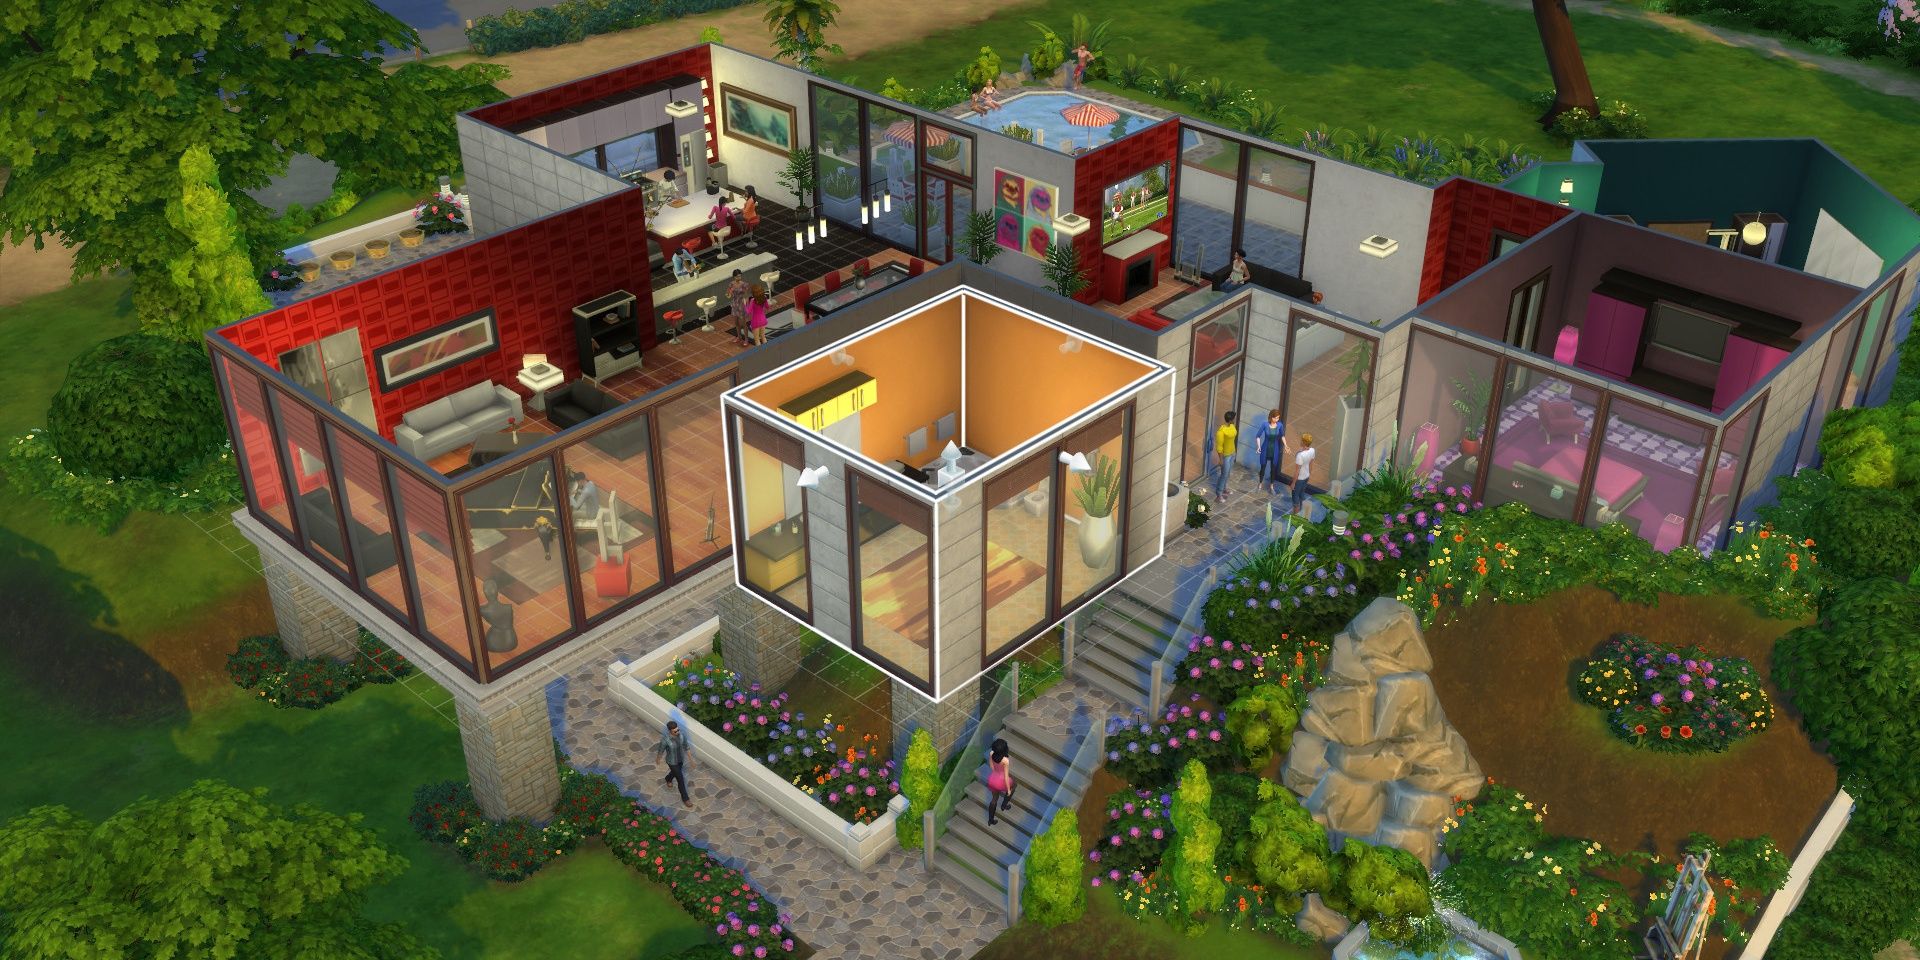 A house with plenty of windows and characters entering it in The Sims 4